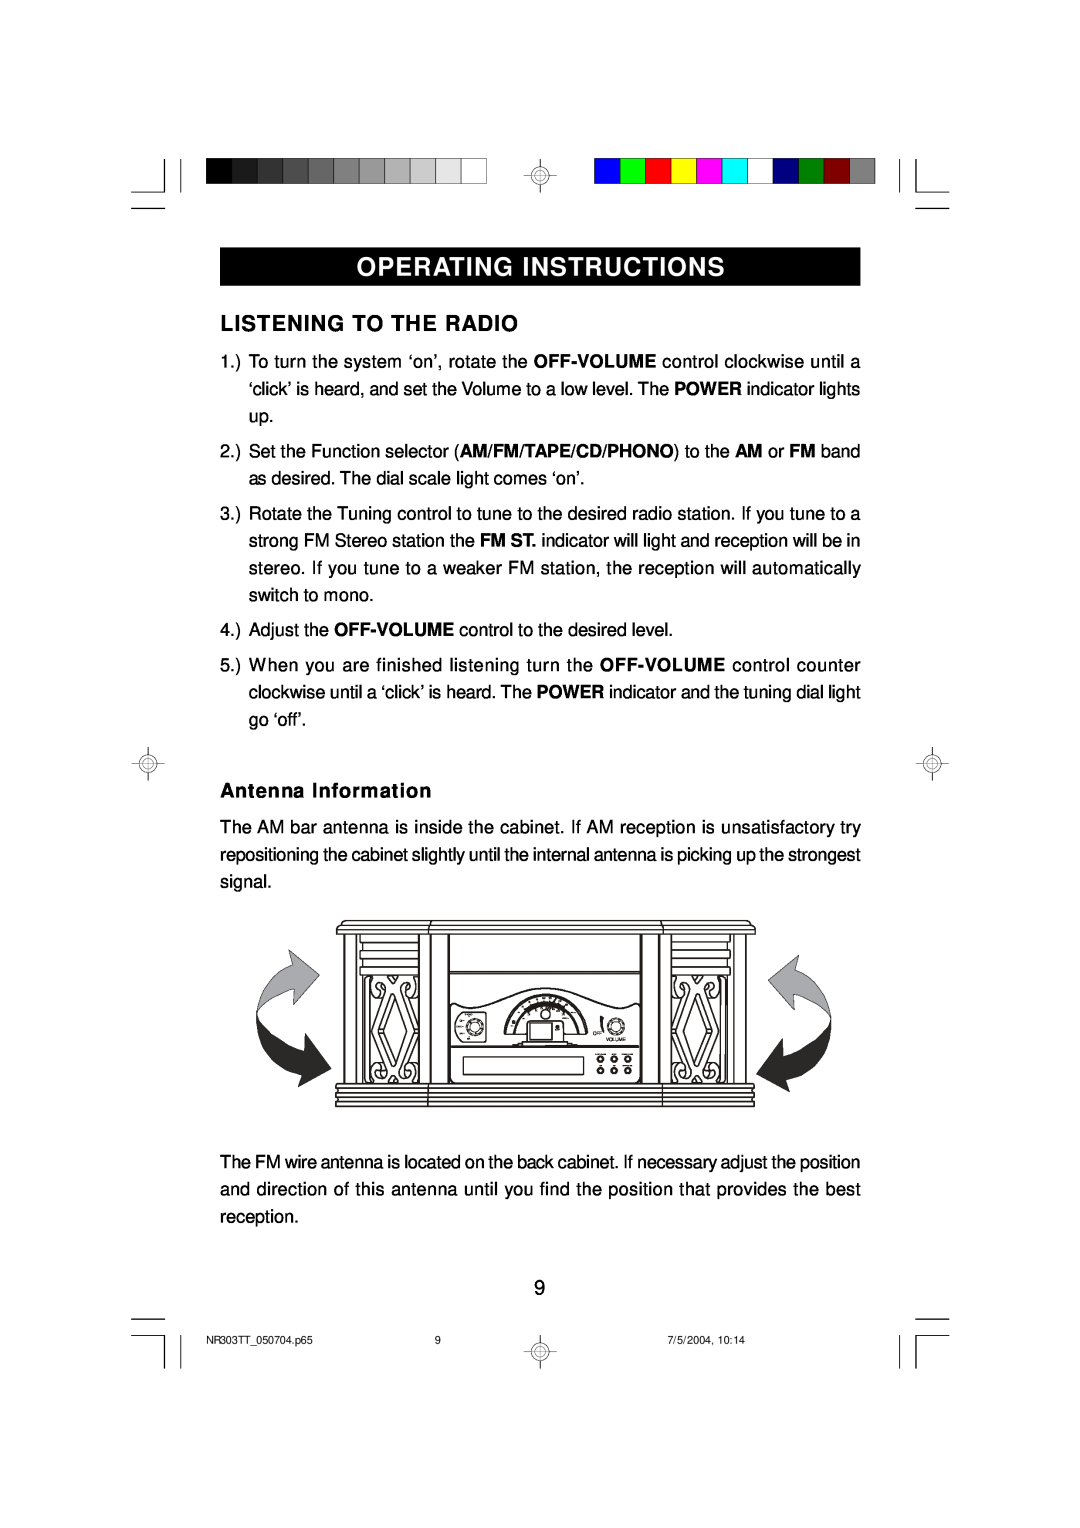 Emerson NR303TT owner manual Operating Instructions, Listening To The Radio, Antenna Information 